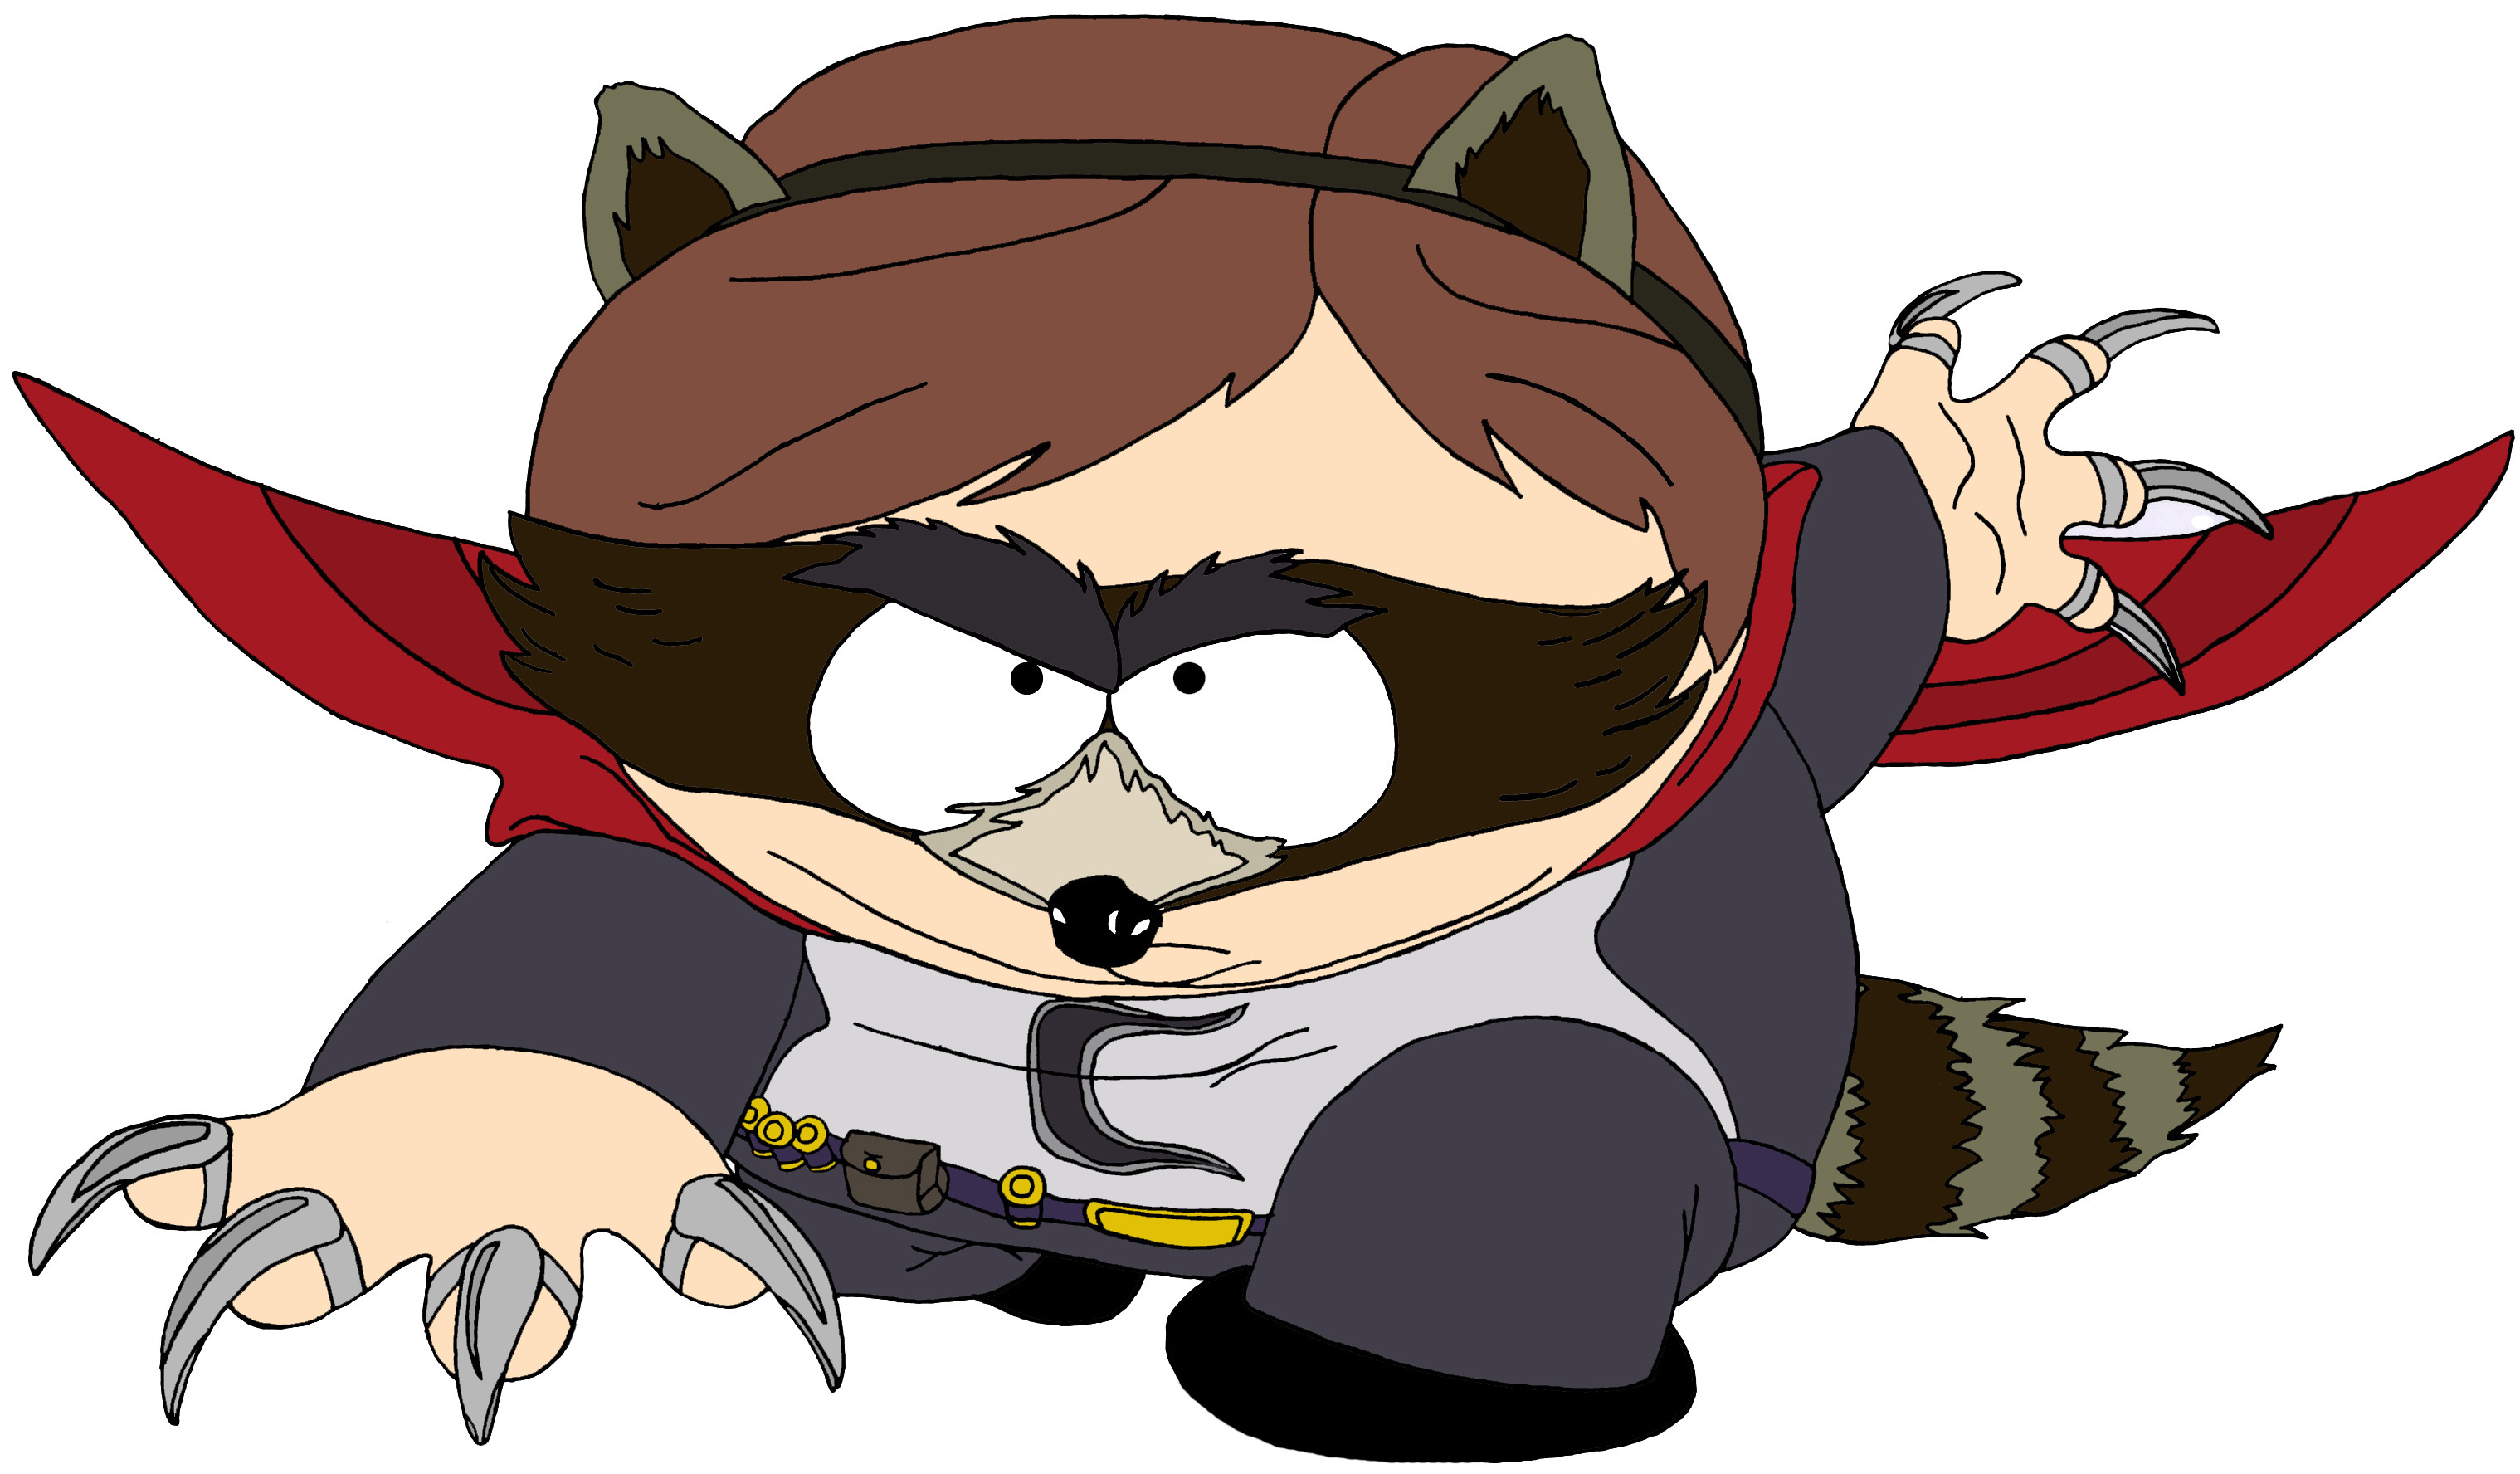 south_park_action_poses___the_coon_7_by_